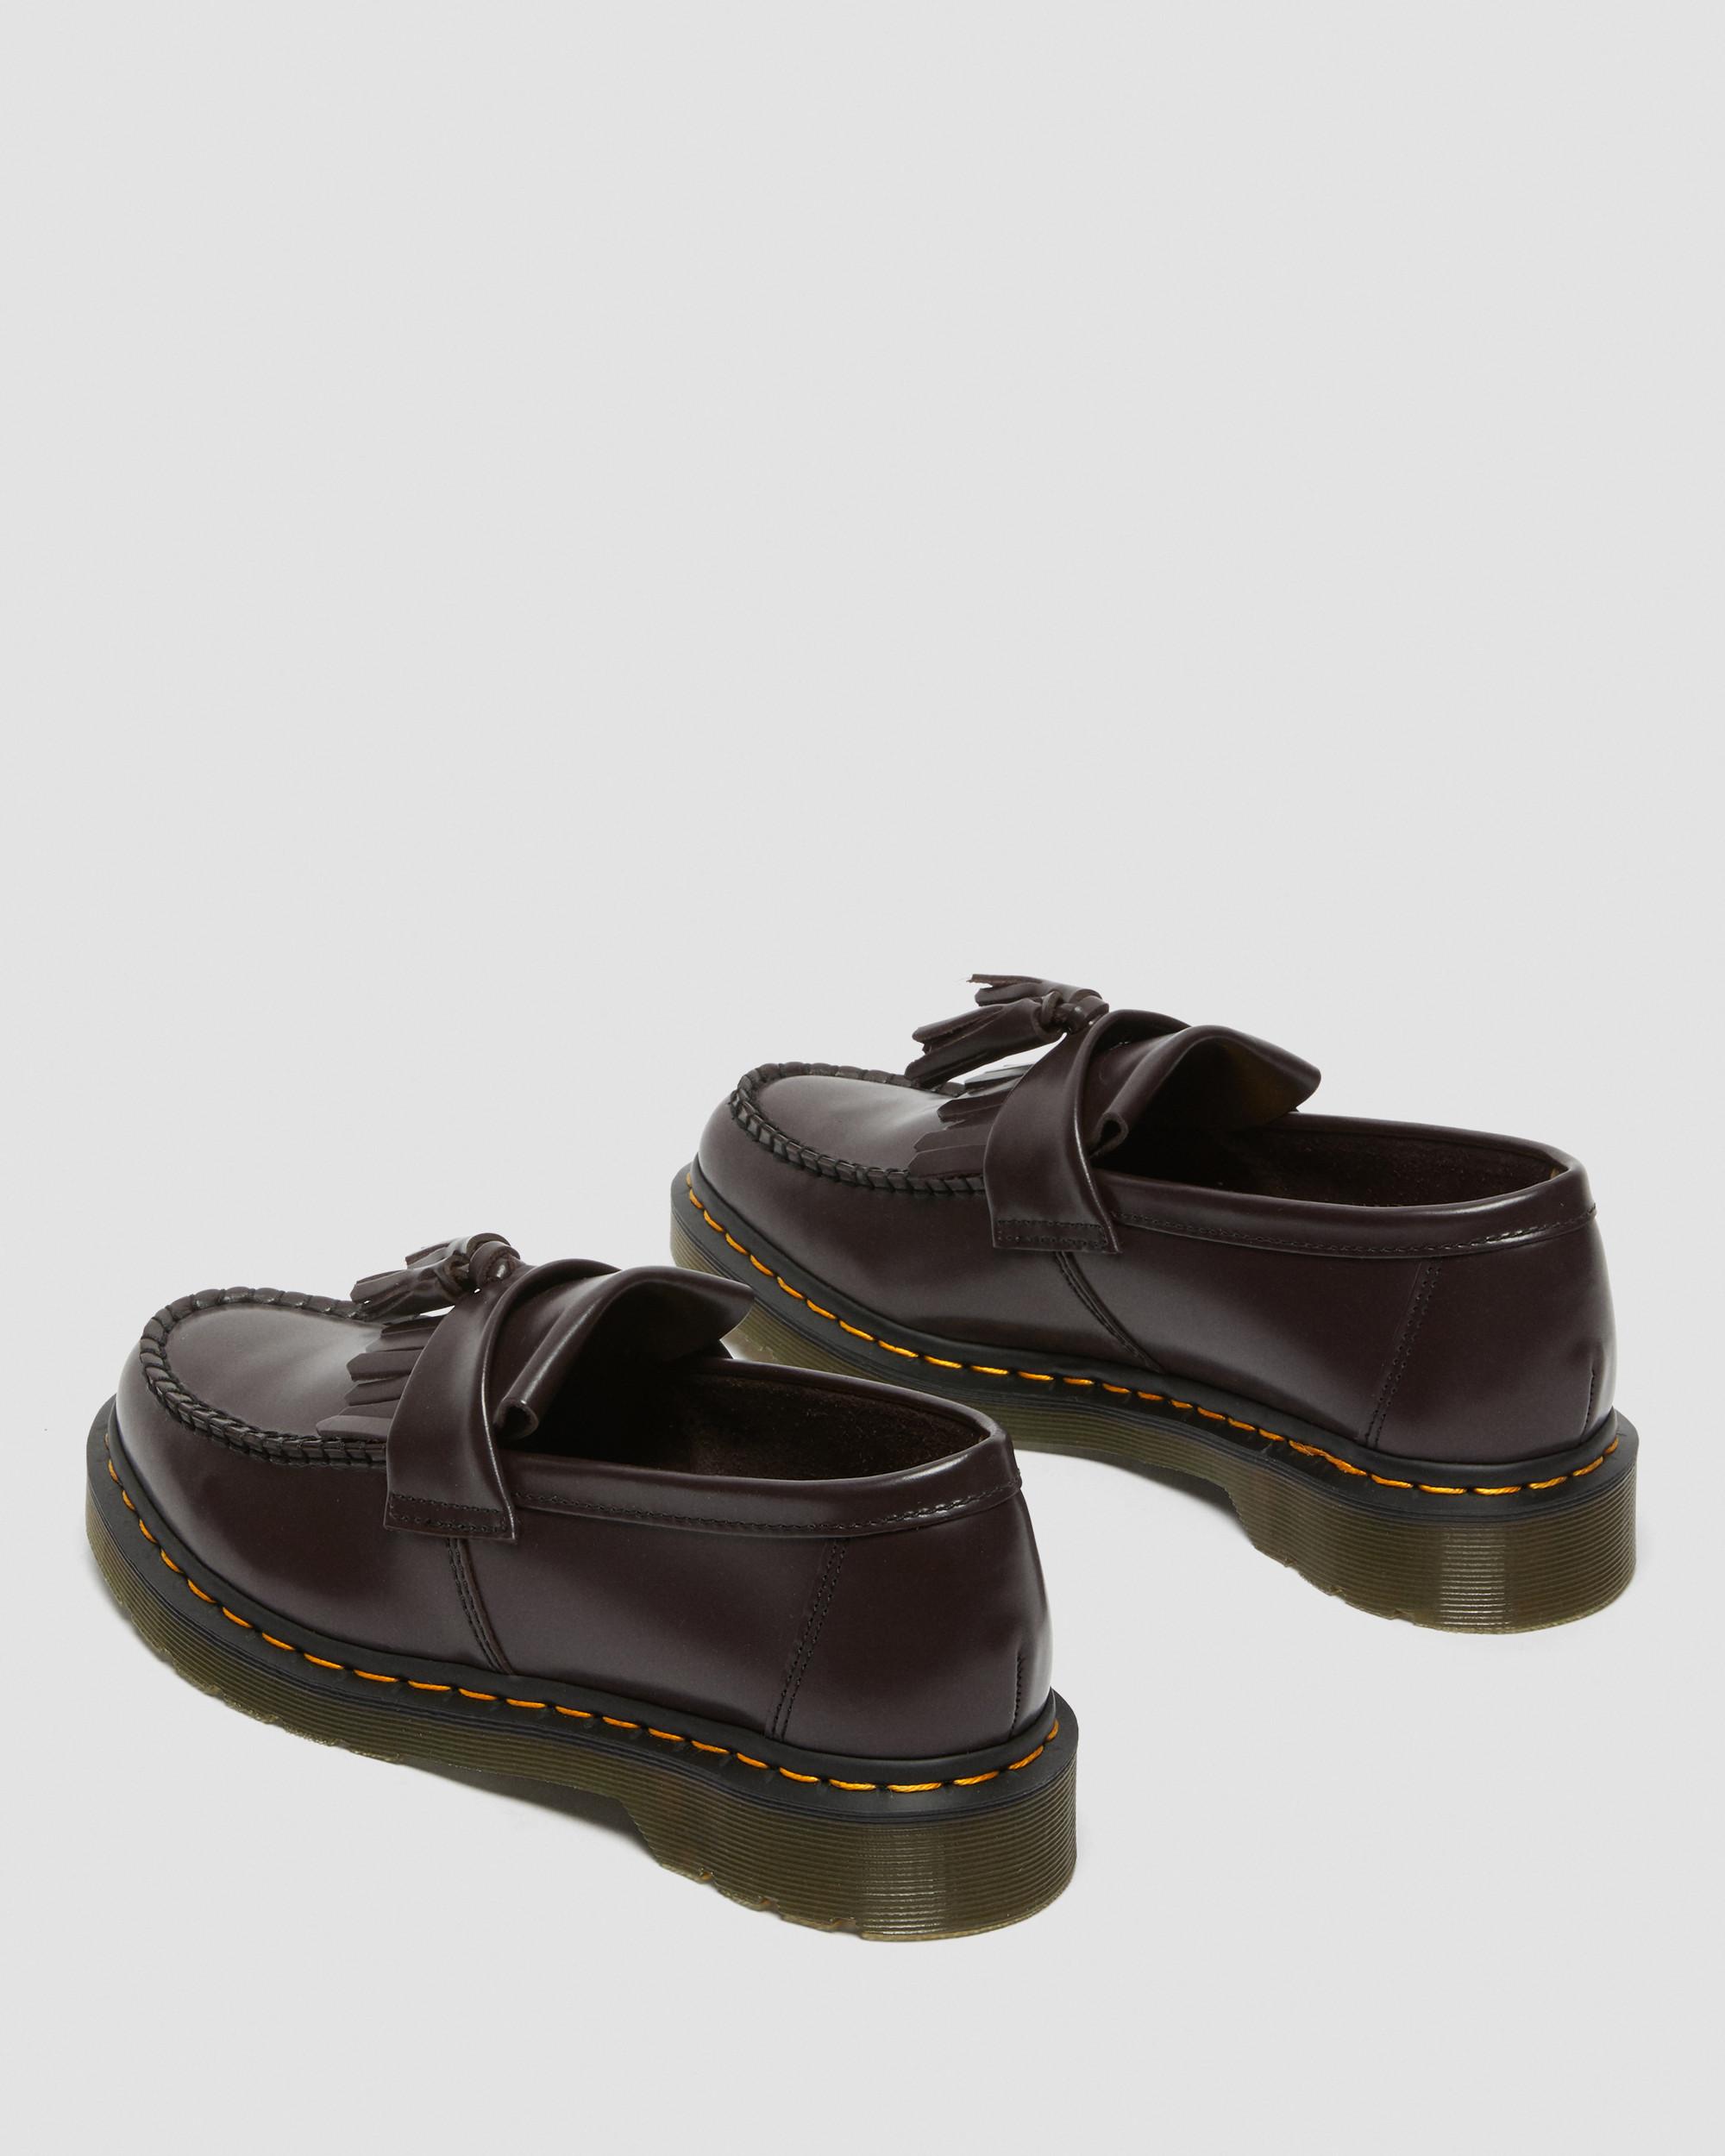 Adrian Yellow Stitch Burgundy Smooth Leather Tassel LoafersAdrian Yellow Stitch Smooth Leather Tassle Loafers Dr. Martens